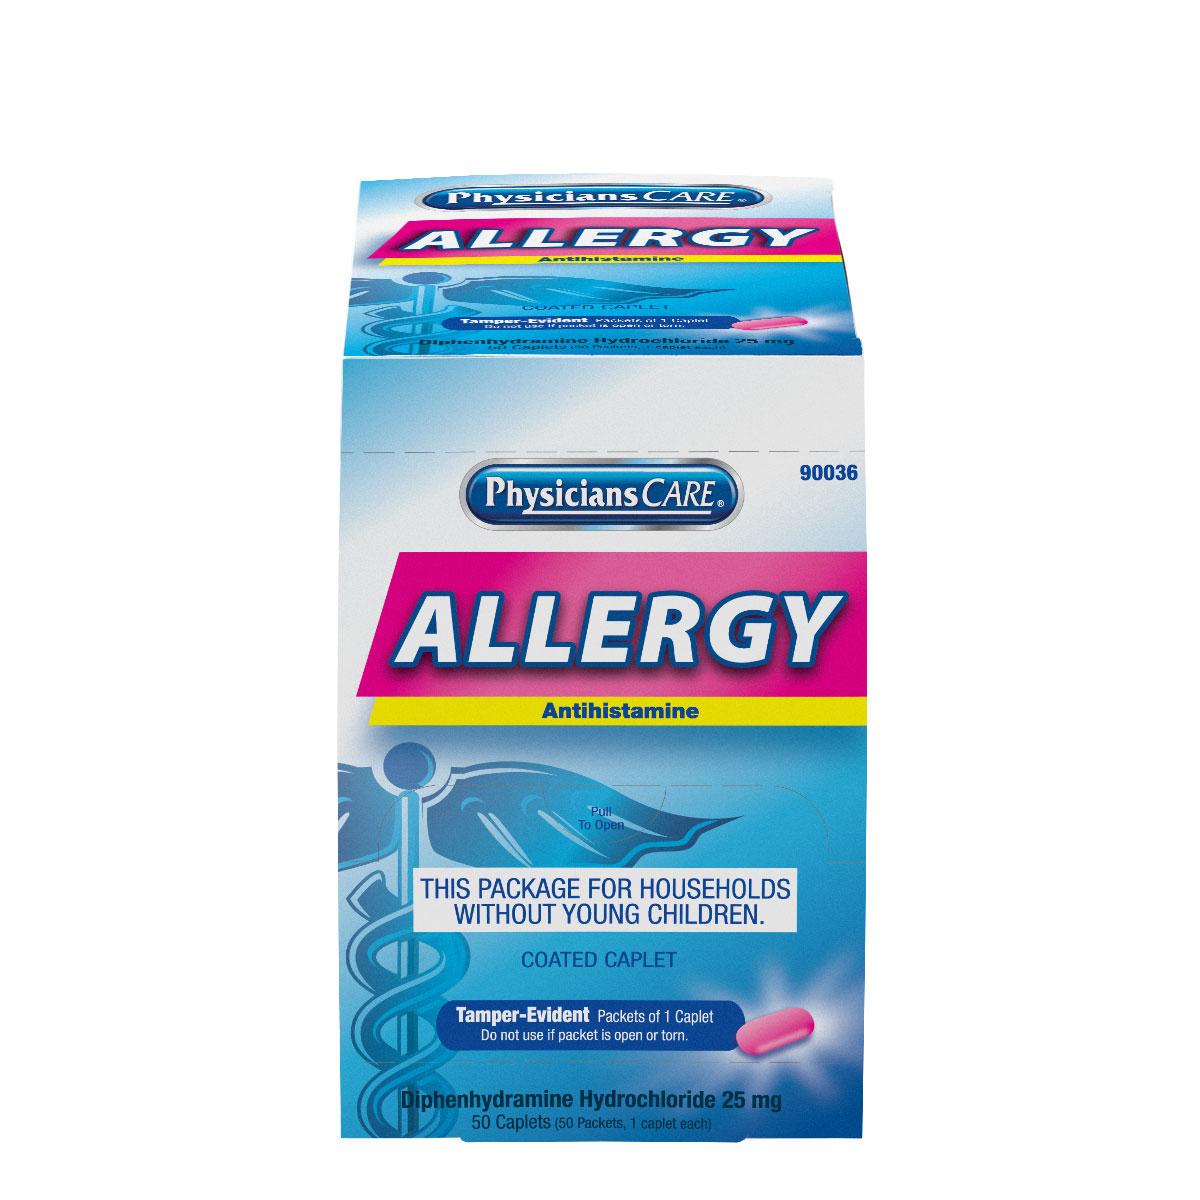 Recalled PhysiciansCare Allergy in 50 caplets (50 packets, 1 caplet each)